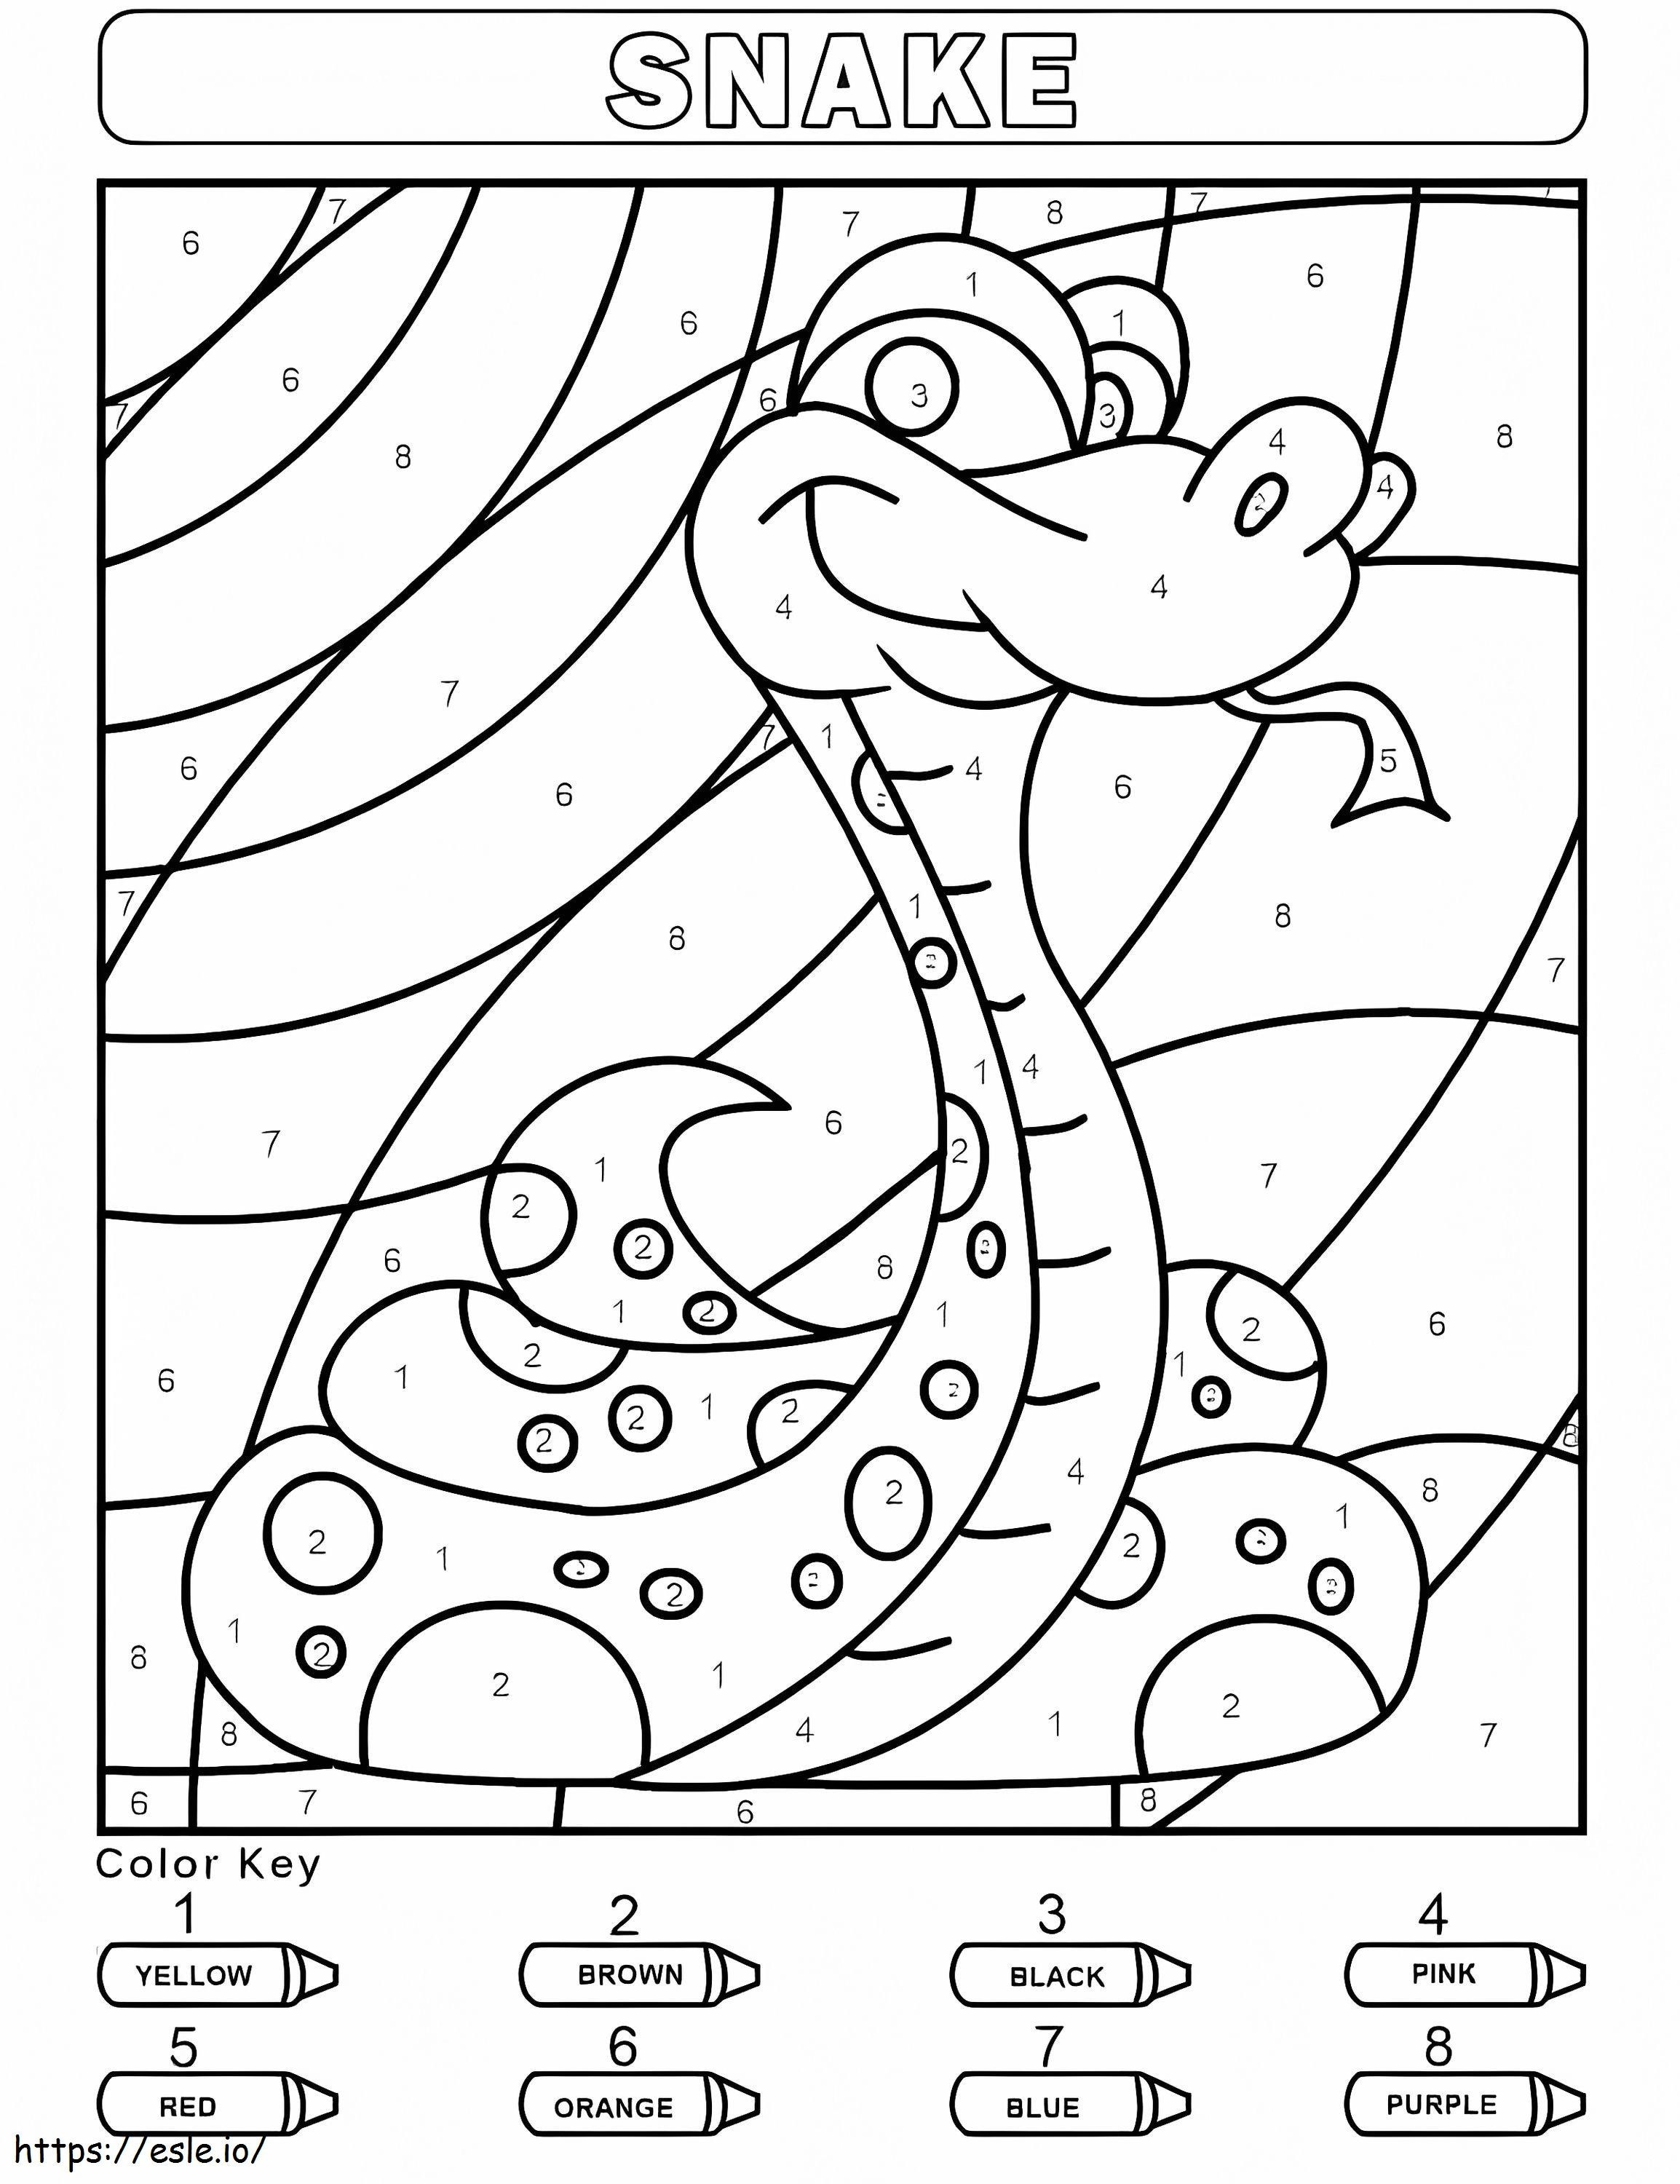 Smiling Snake Color By Number coloring page